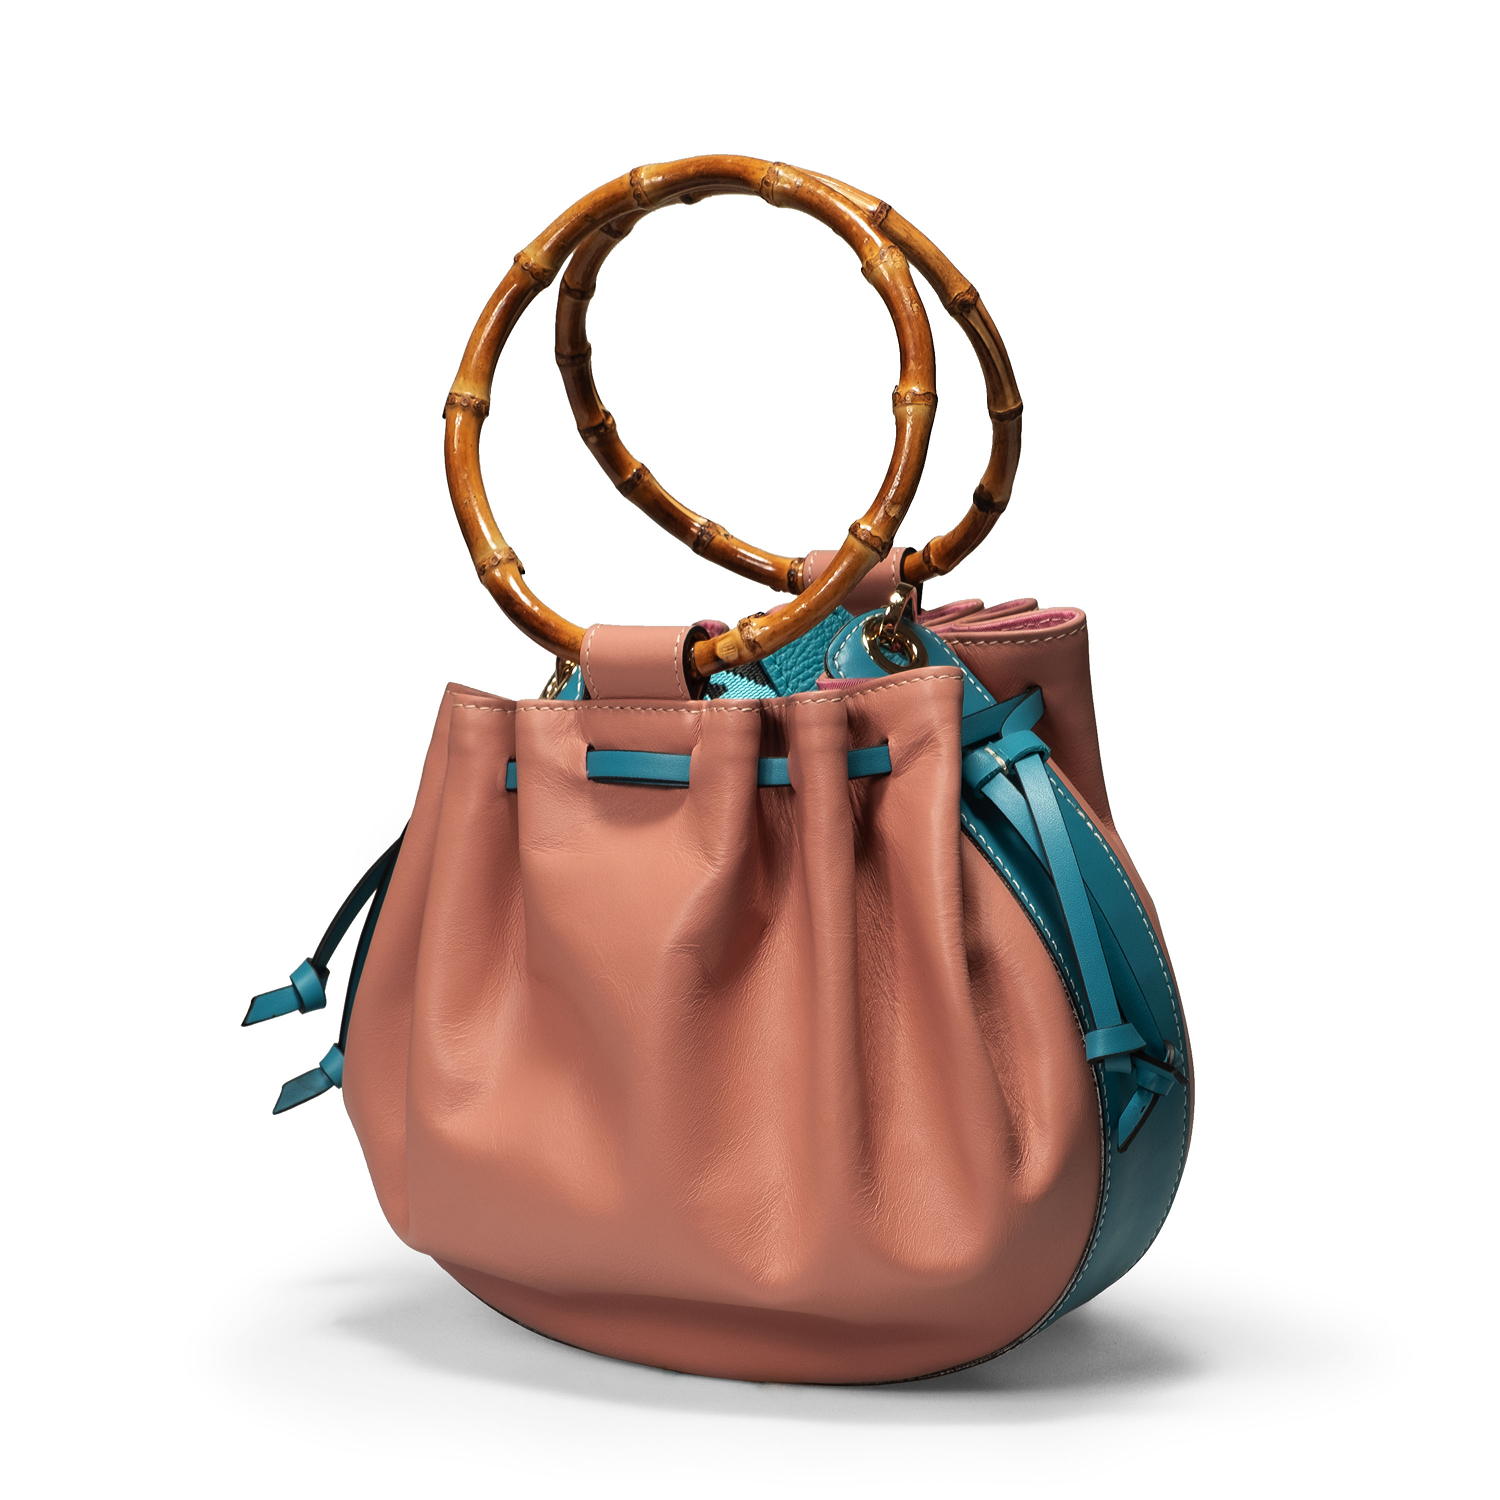 Carrara New bucket bag with bamboo handles by Bellini, Made in Italy. Genuine leather or vegan leather. Private label, OEM handbags.